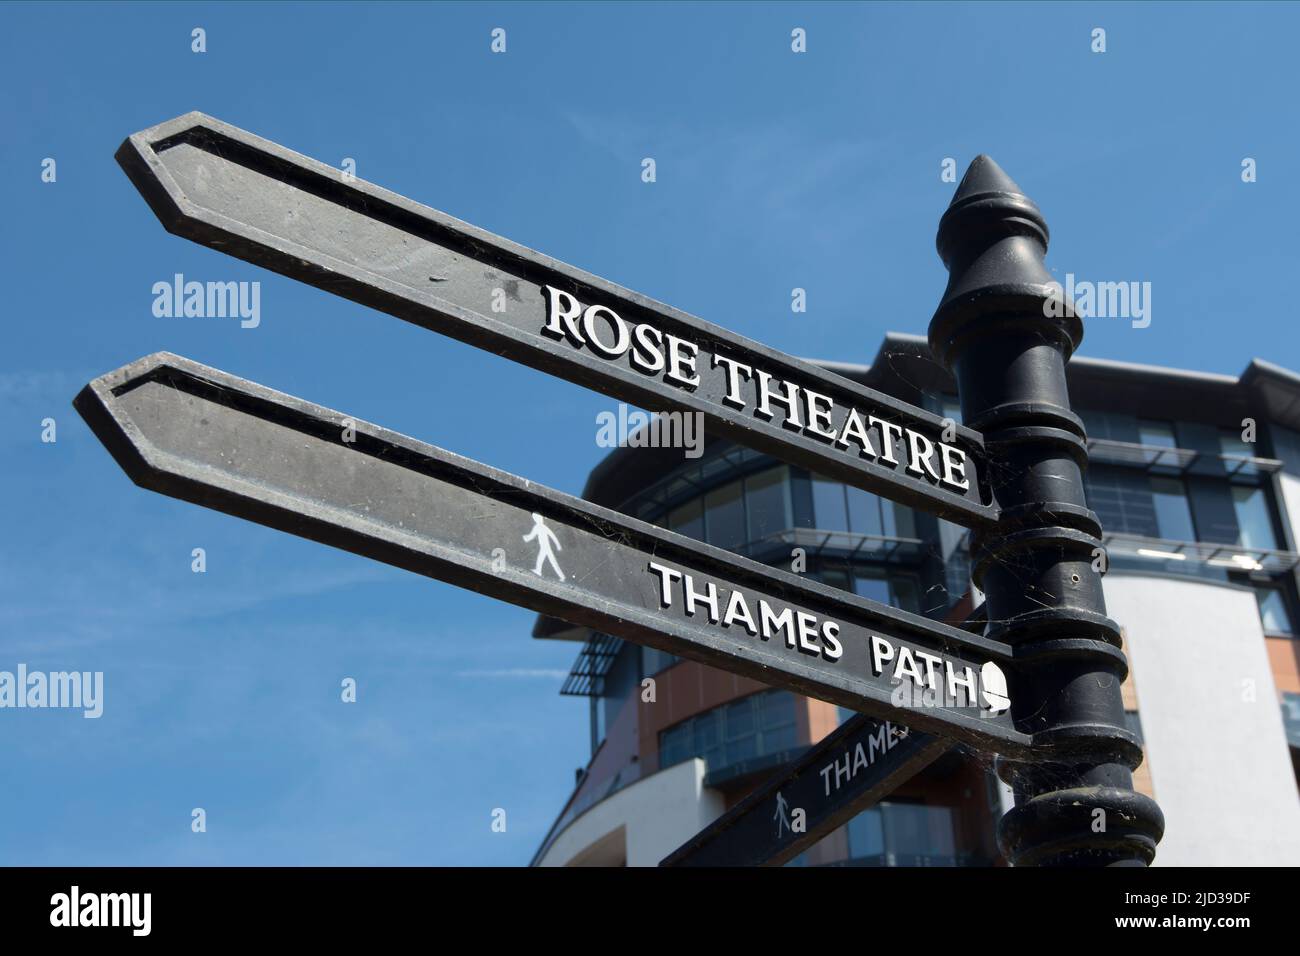 left-pointing wayfinding signs for the rose theatre and the thames path in kingston upon thames, surrey, england Stock Photo